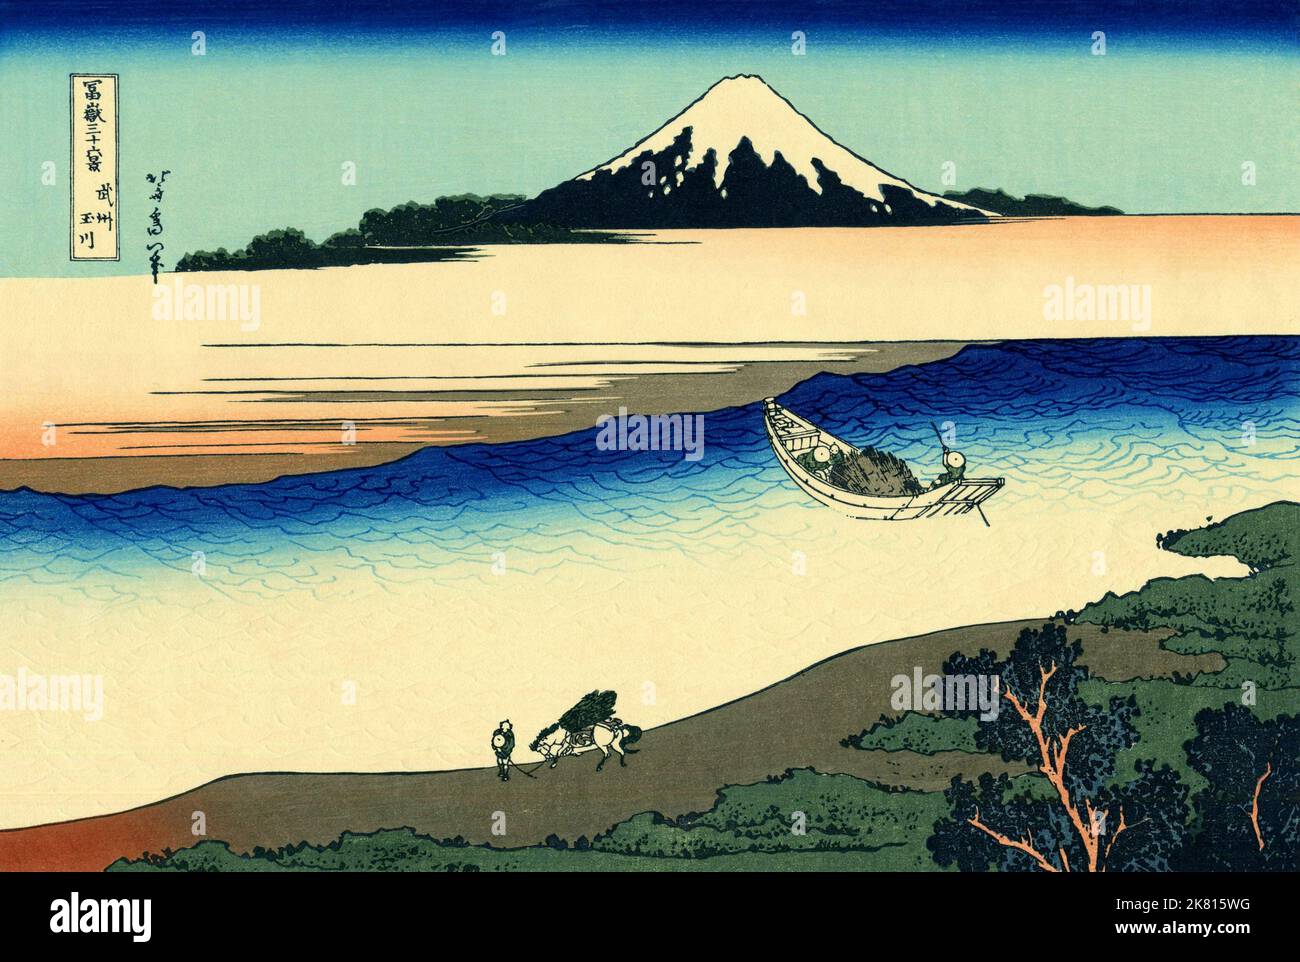 Japan: ‘Tama River in Musashi Province’. Ukiyo-e woodblock print from the series ‘Thirty-six Views of Mount Fuji’ by Katsushika Hokusai (31 October 1760 - 10 May 1849), c. 1830.  ‘36 Views of Mount Fuji’ is an ‘ukiyo-e’ series of large woodblock prints by the artist Katsushika Hokusai. The series depicts Mount Fuji in differing seasons and weather conditions from a variety of places and distances. It actually consists of 46 prints created between 1826 and 1833. The first 36 were included in the original publication and, due to their popularity, 10 more were added afterwards. Stock Photo